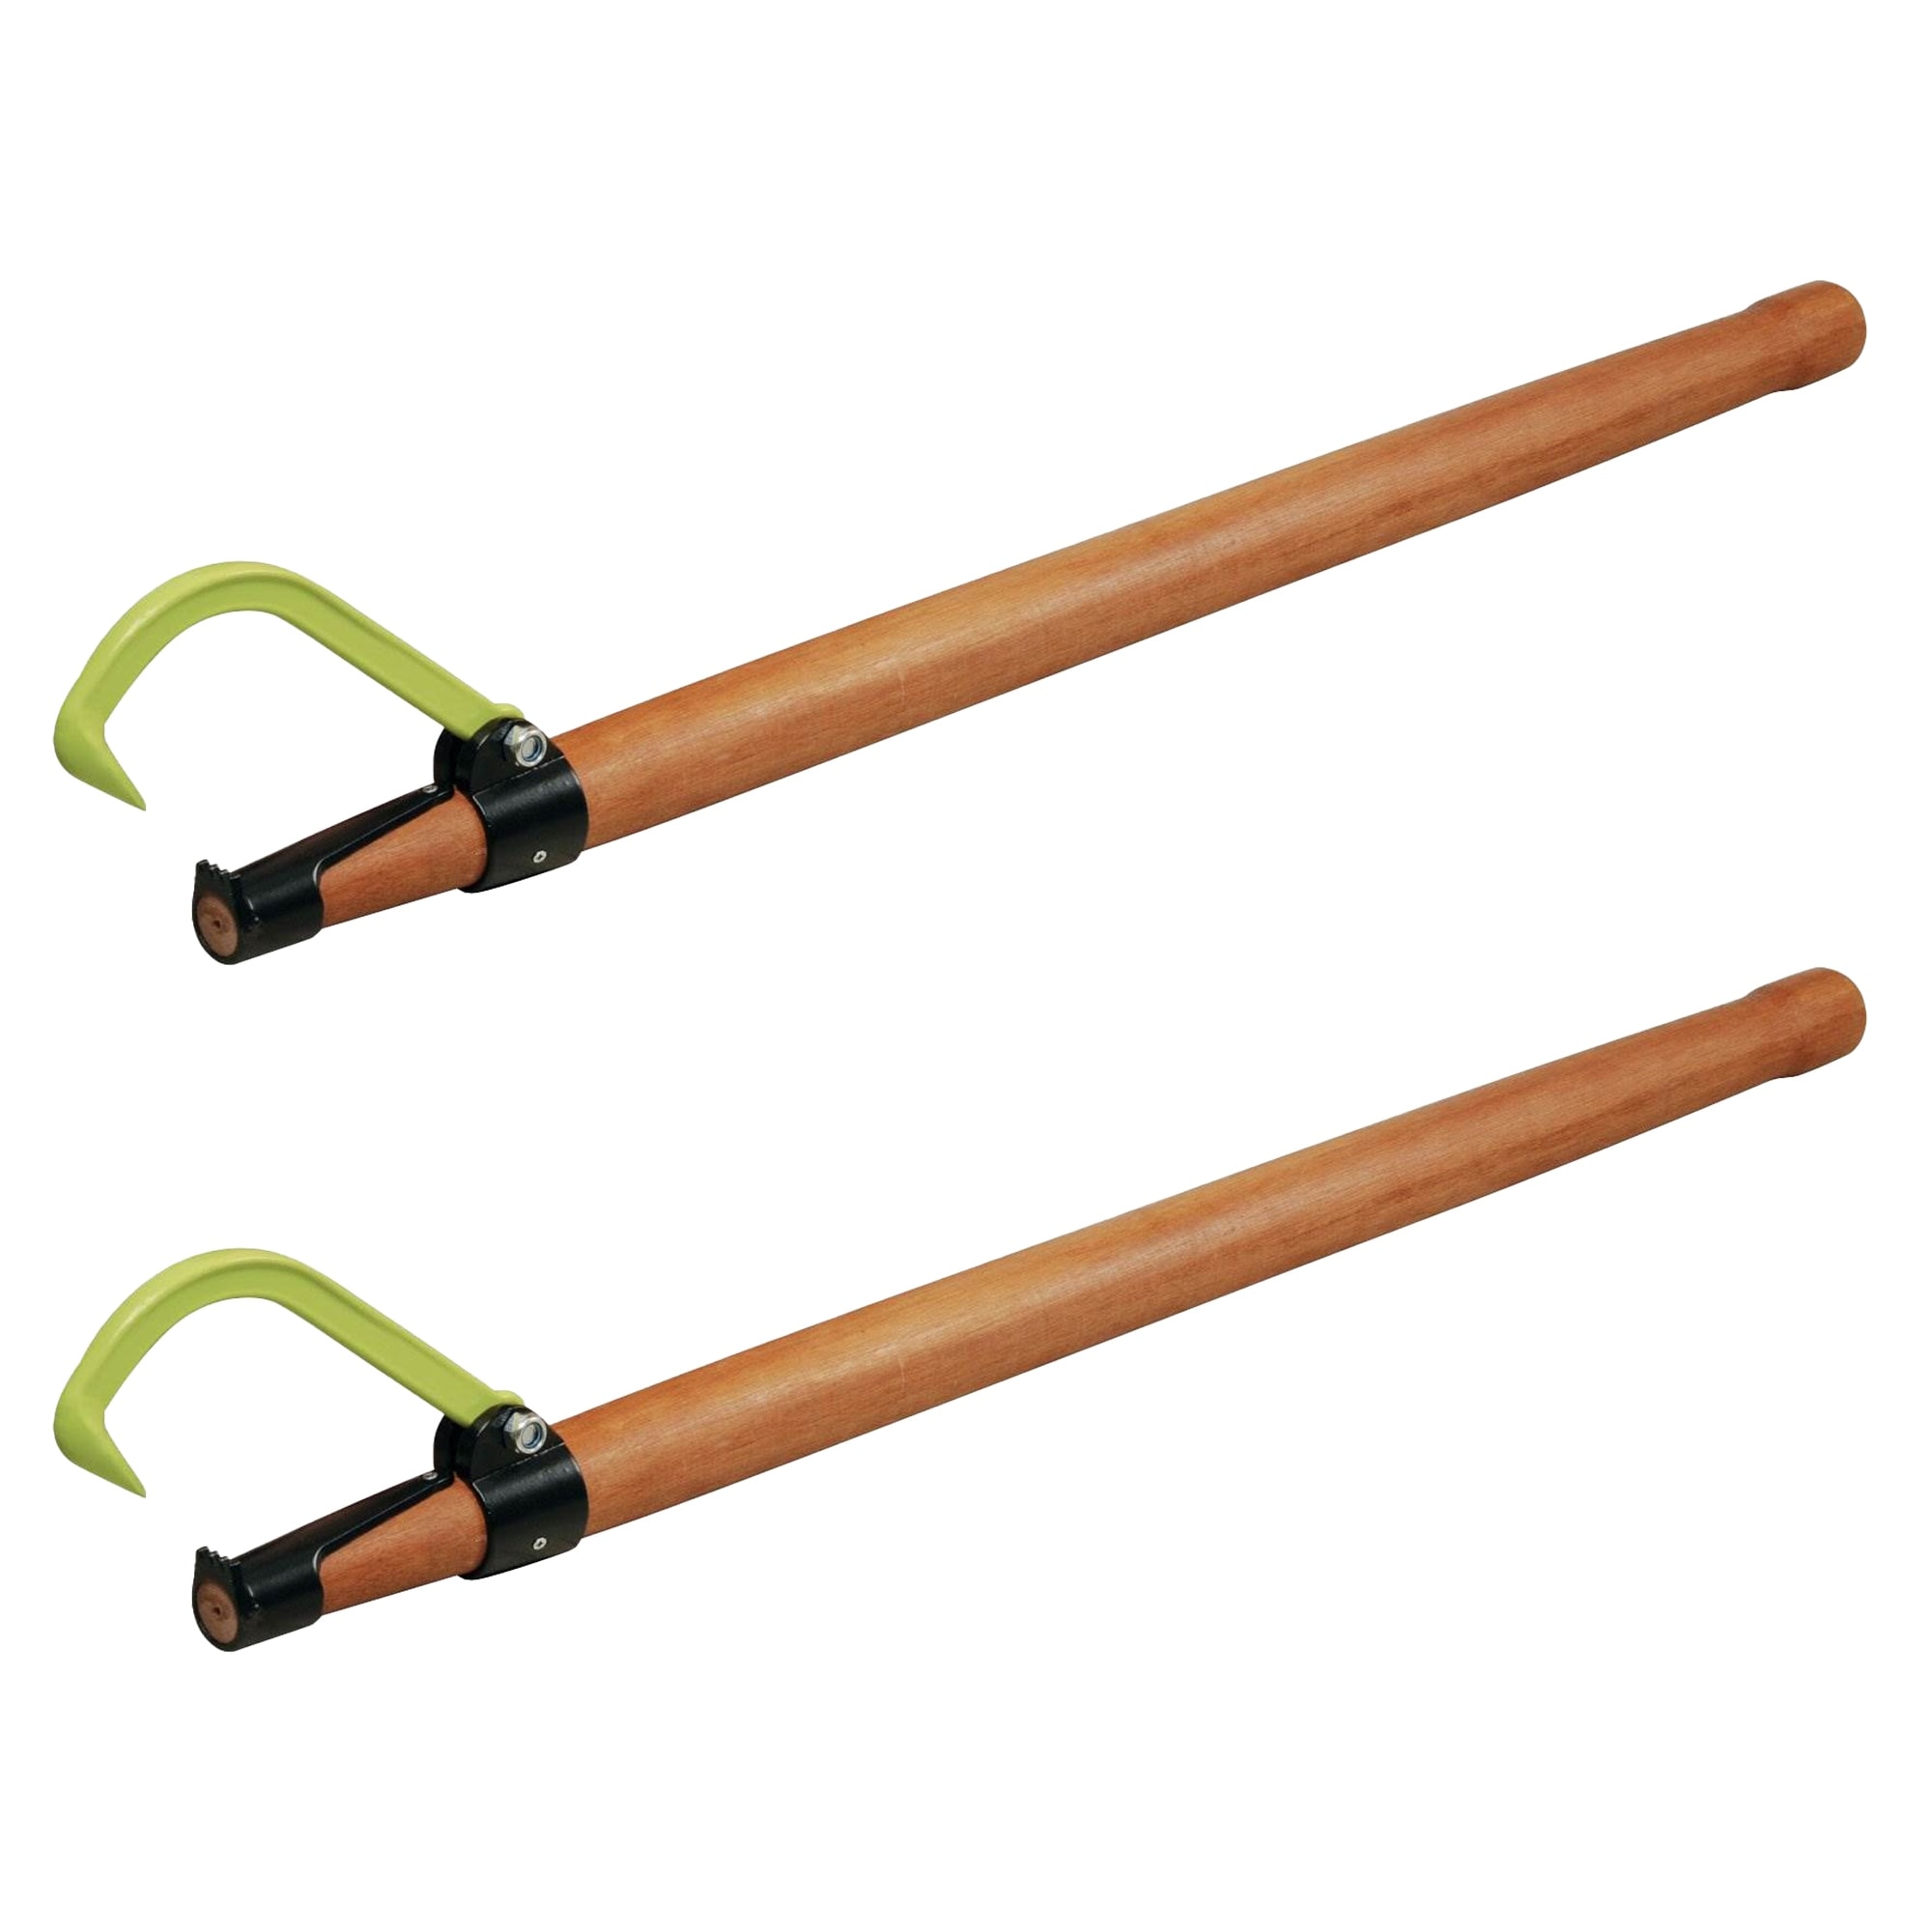 https://ak1.ostkcdn.com/images/products/is/images/direct/5fb5185c574c1863ecbbdca8216cc2417dffd016/Timber-Tuff-TMW-30-4ft-Wood-Handle-Logging-Rolling-Forestry-Cant-Hook-%282-Pack%29.jpg